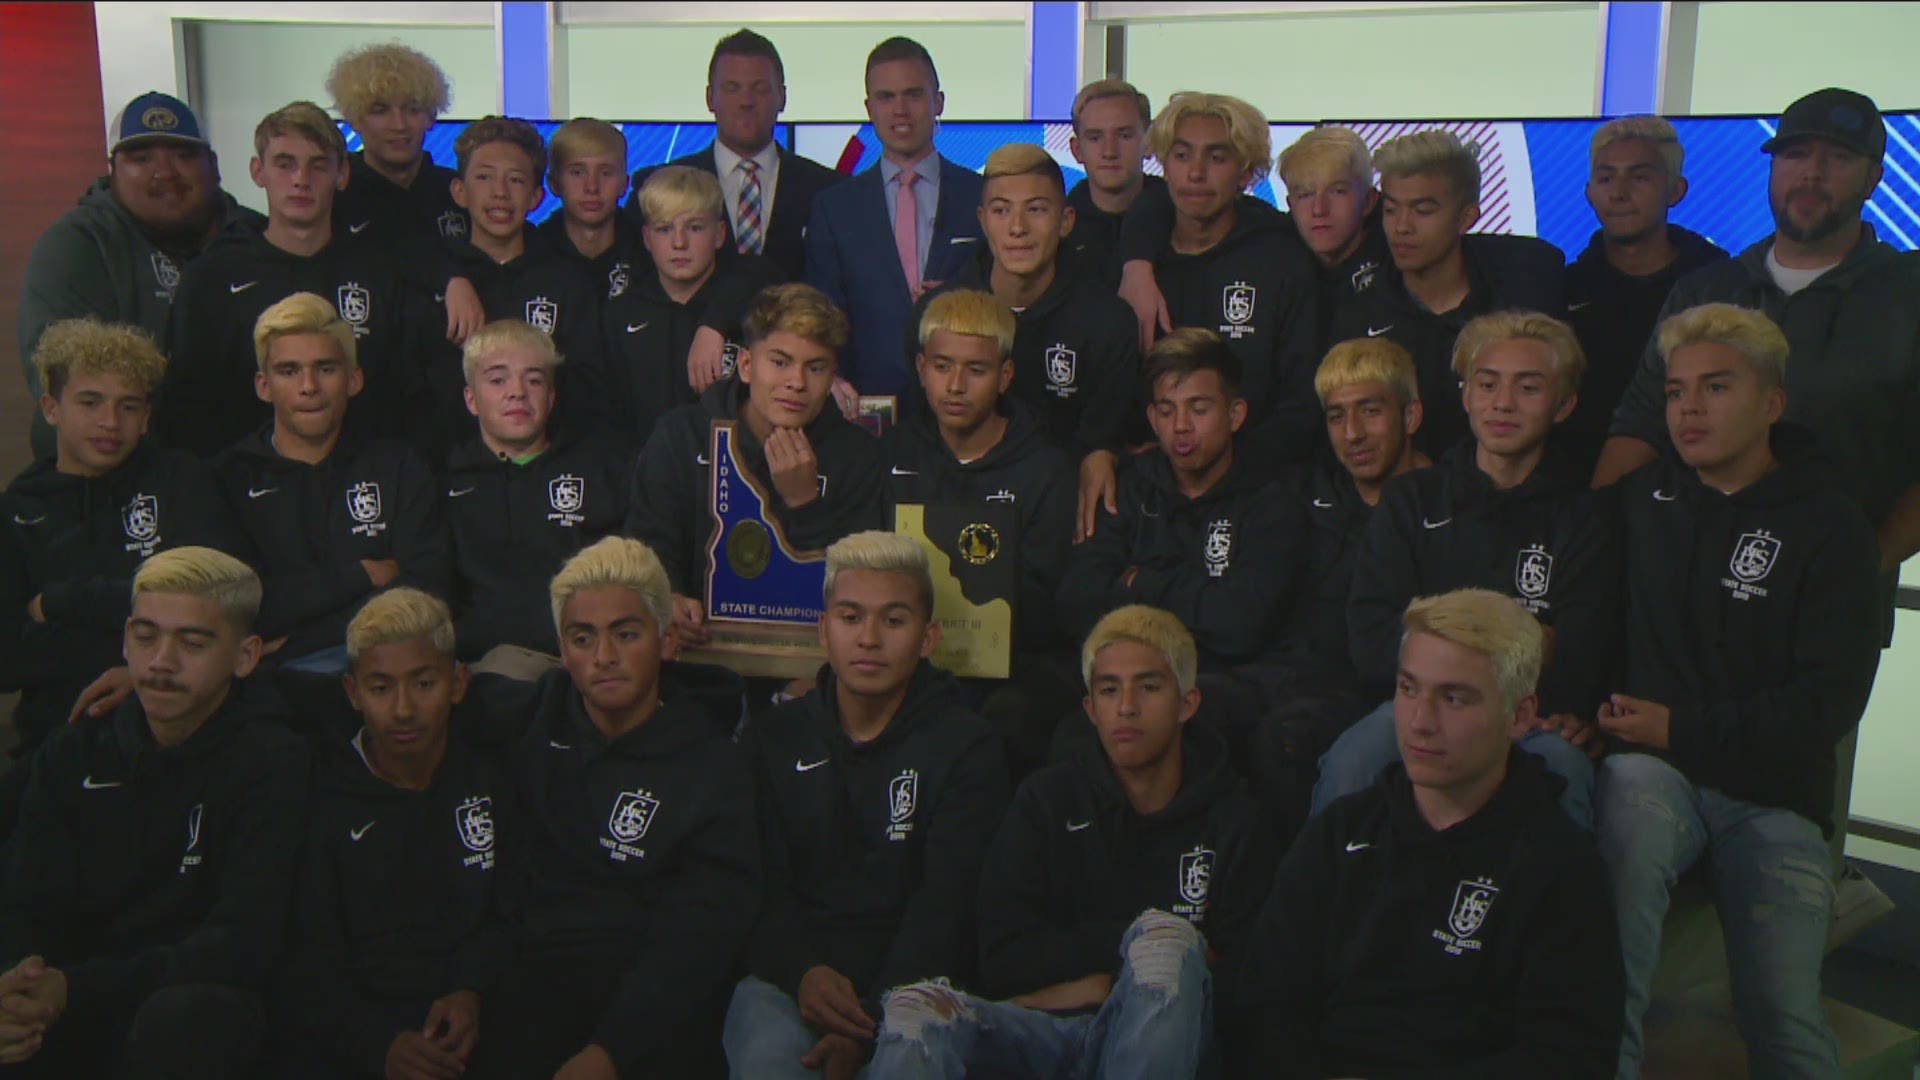 The Caldwell High School boys varsity soccer team joined Jay Tust & Will Hall on set after winning their second-consecutive 4A state title.